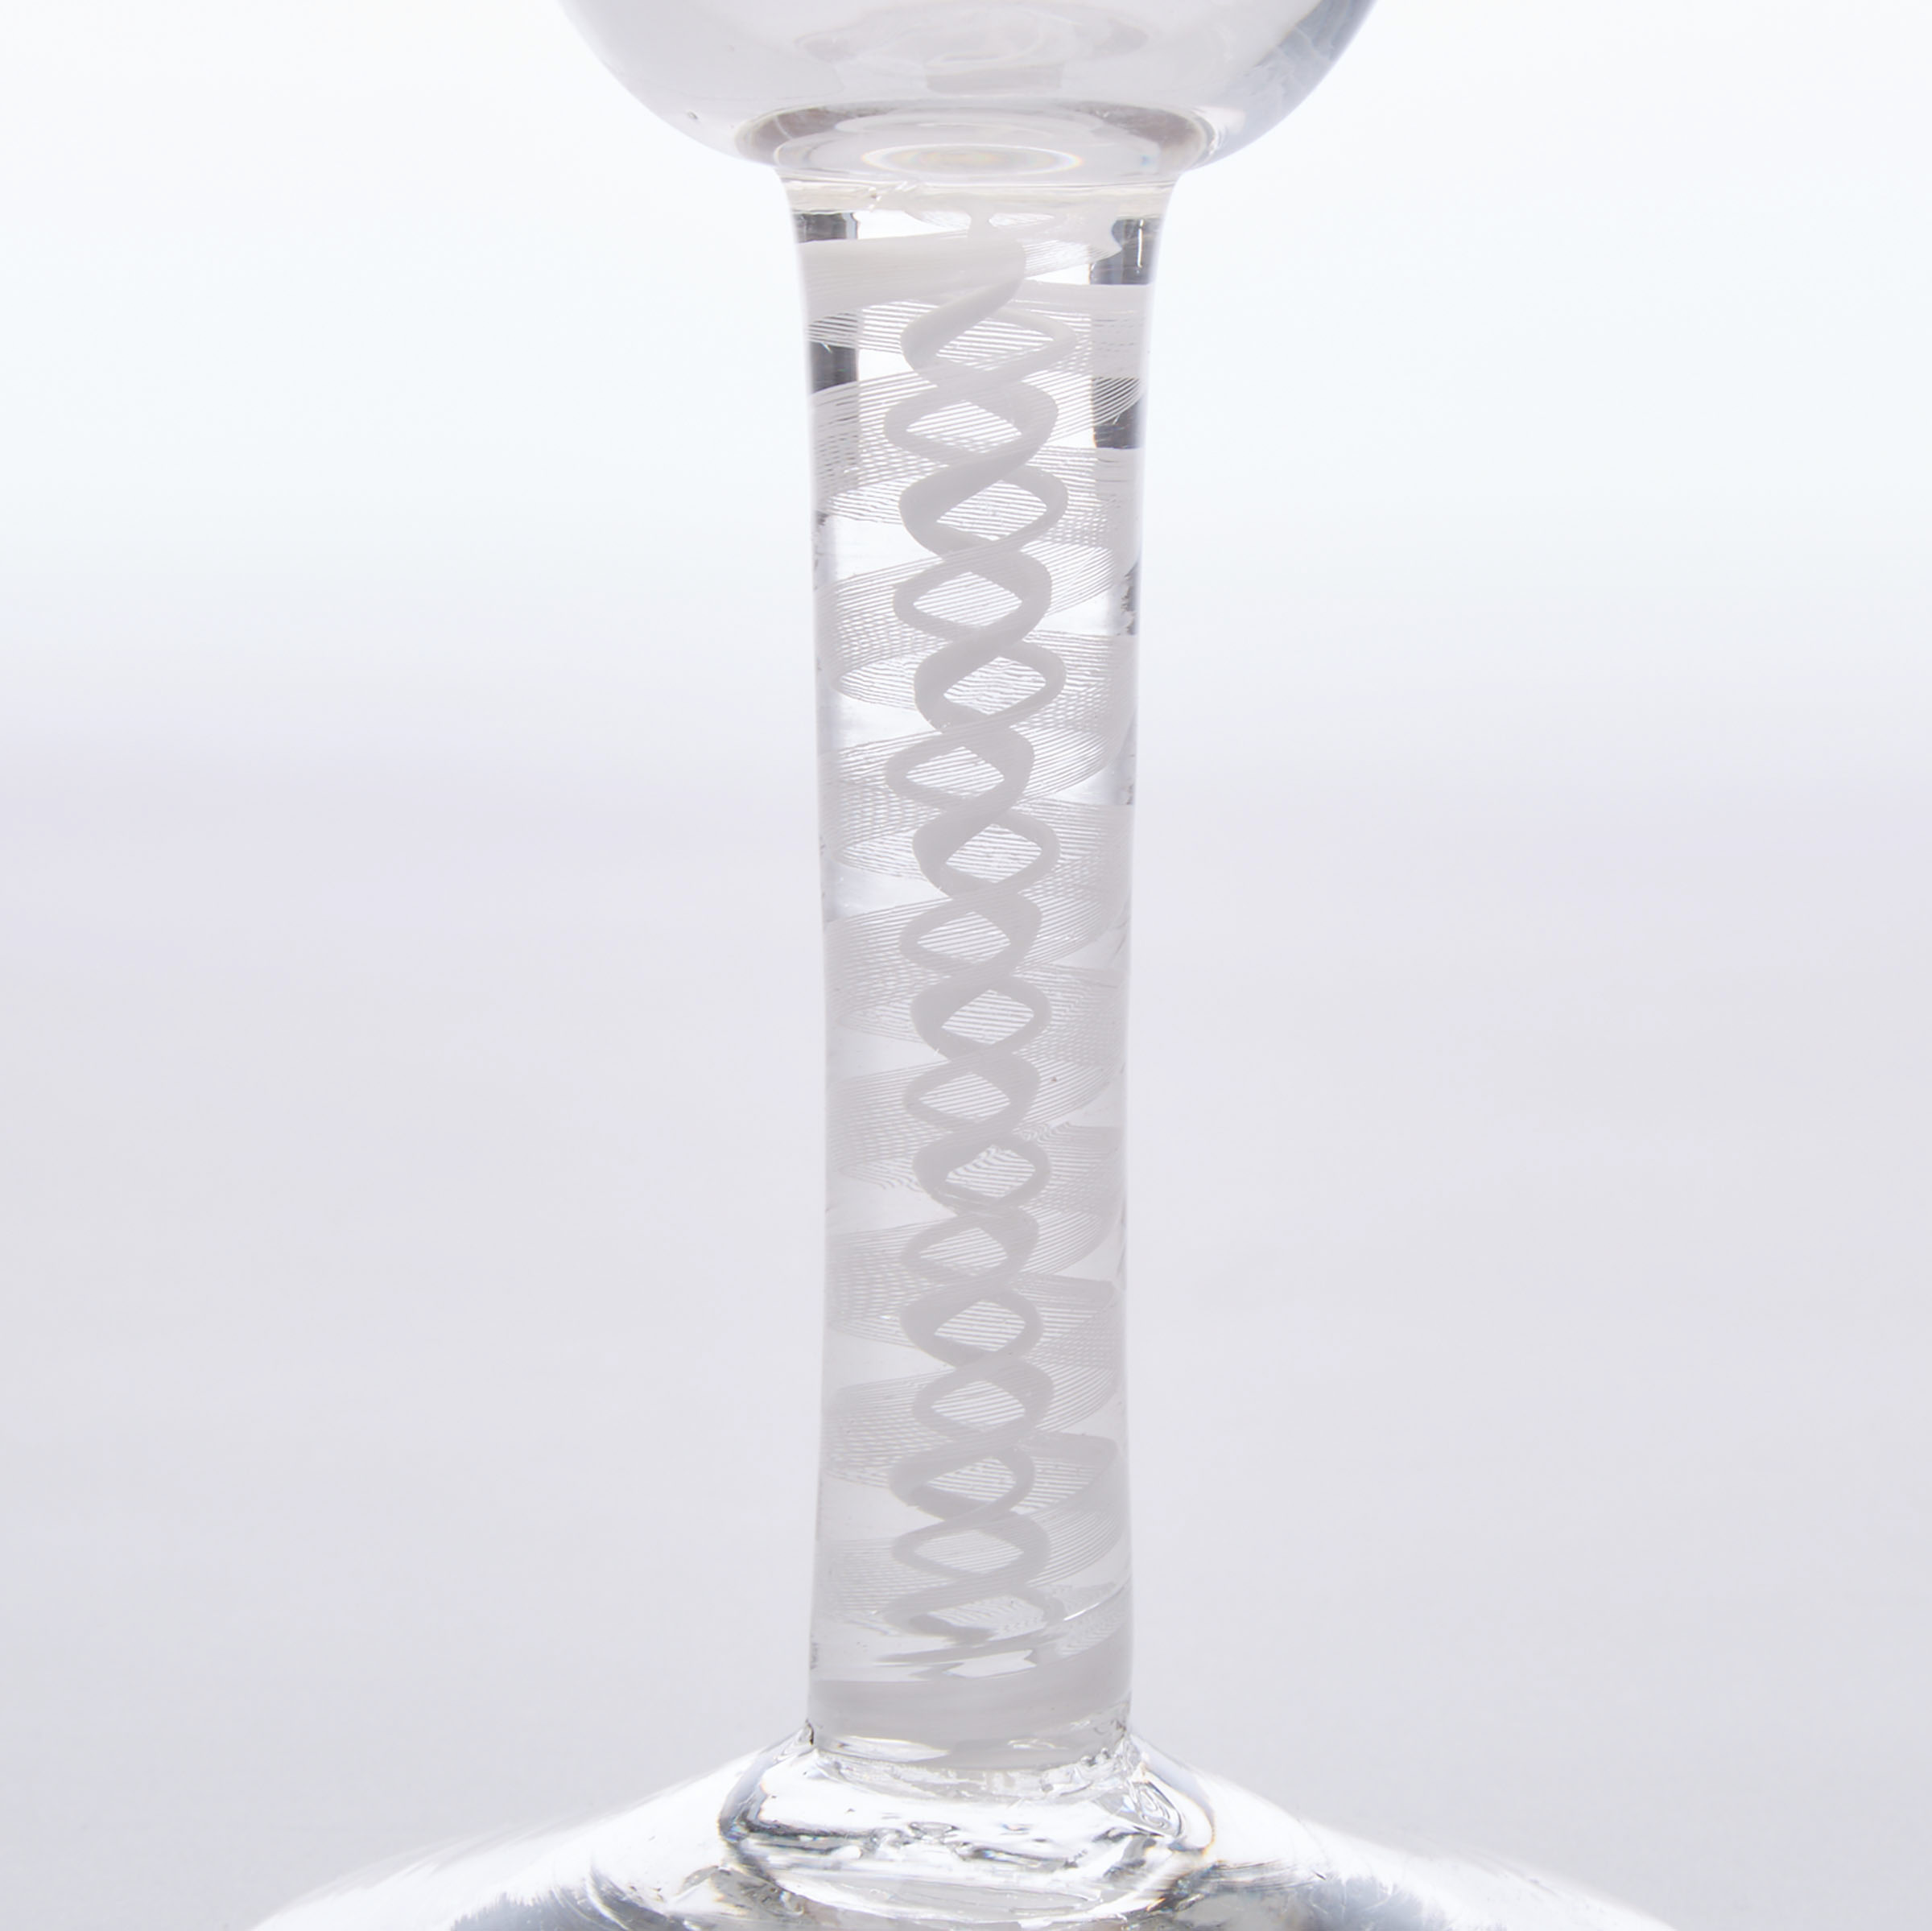 English Double Series Opaque Twist Stemmed Glass Goblet, c.1760-70